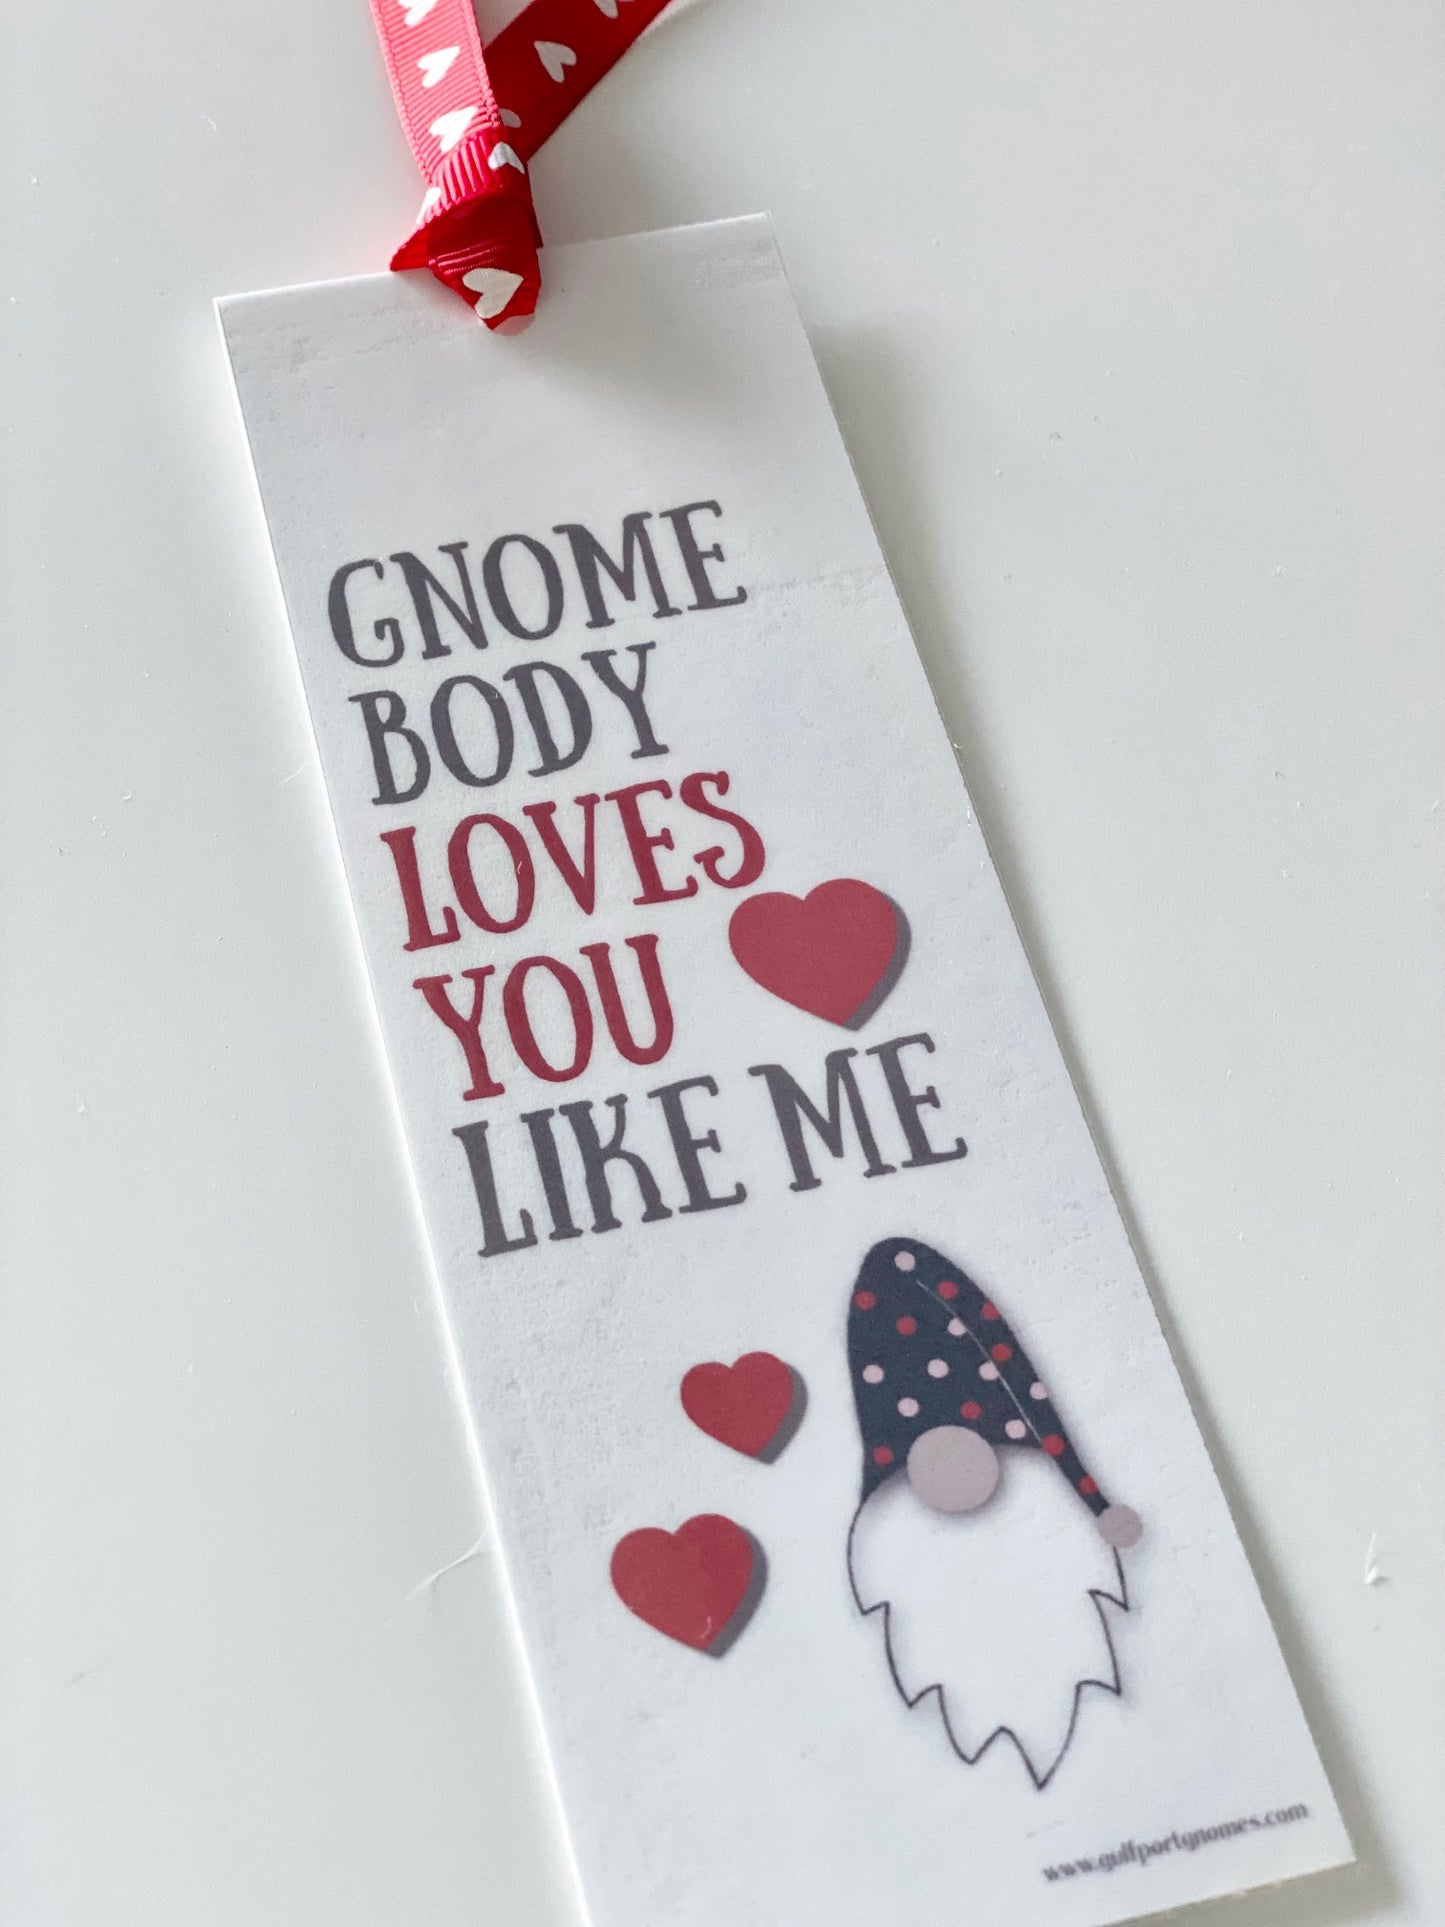 Gnome Bookmark - Gnome body loves you like me